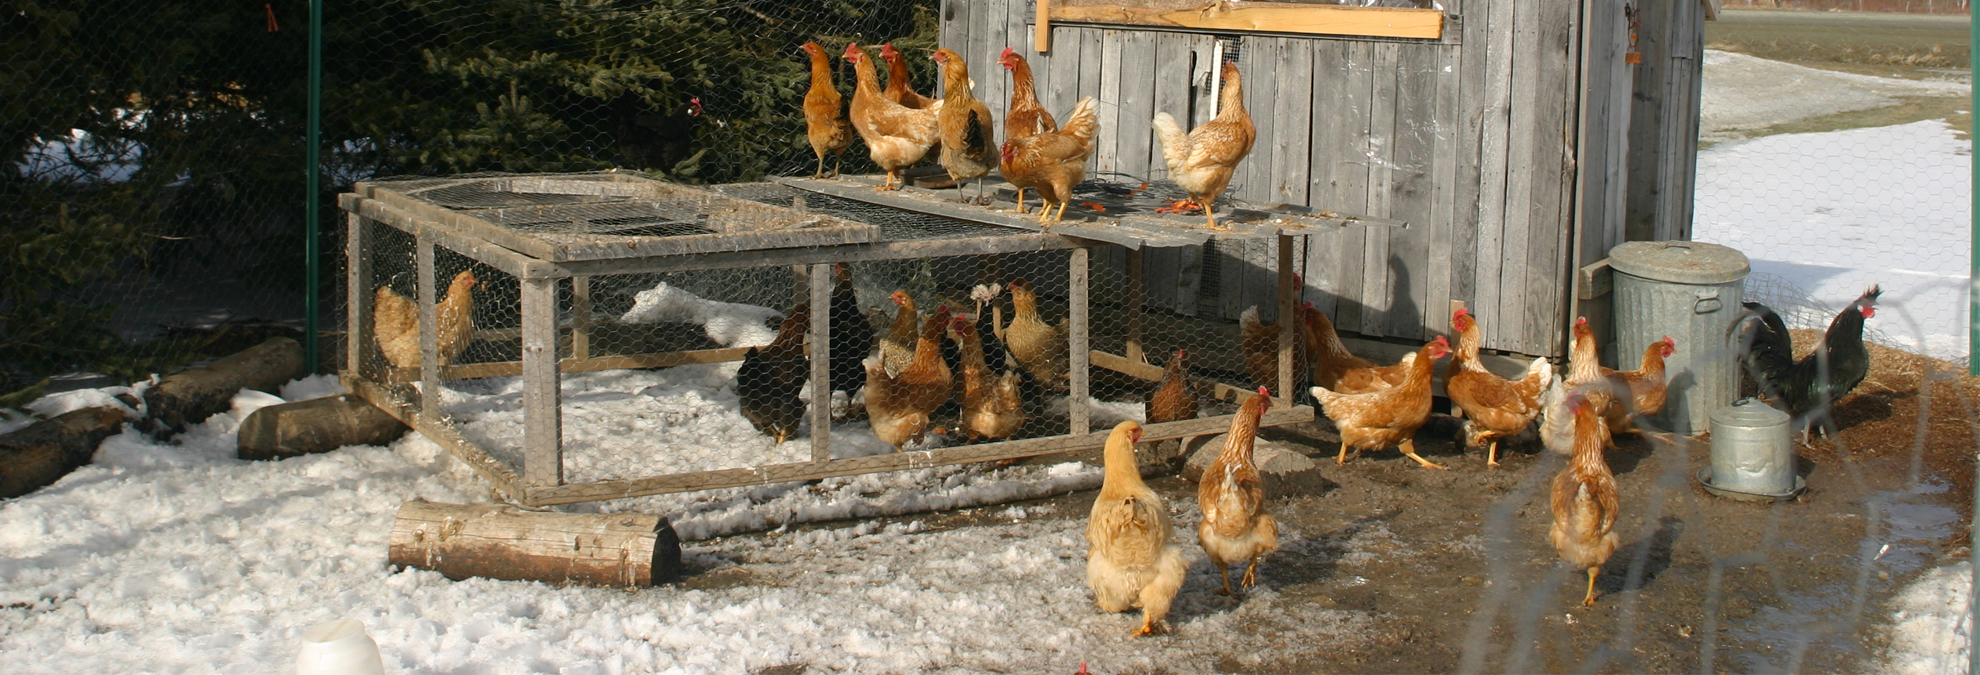 Best Heated Chicken Waterer Of 2019 The Complete Guide